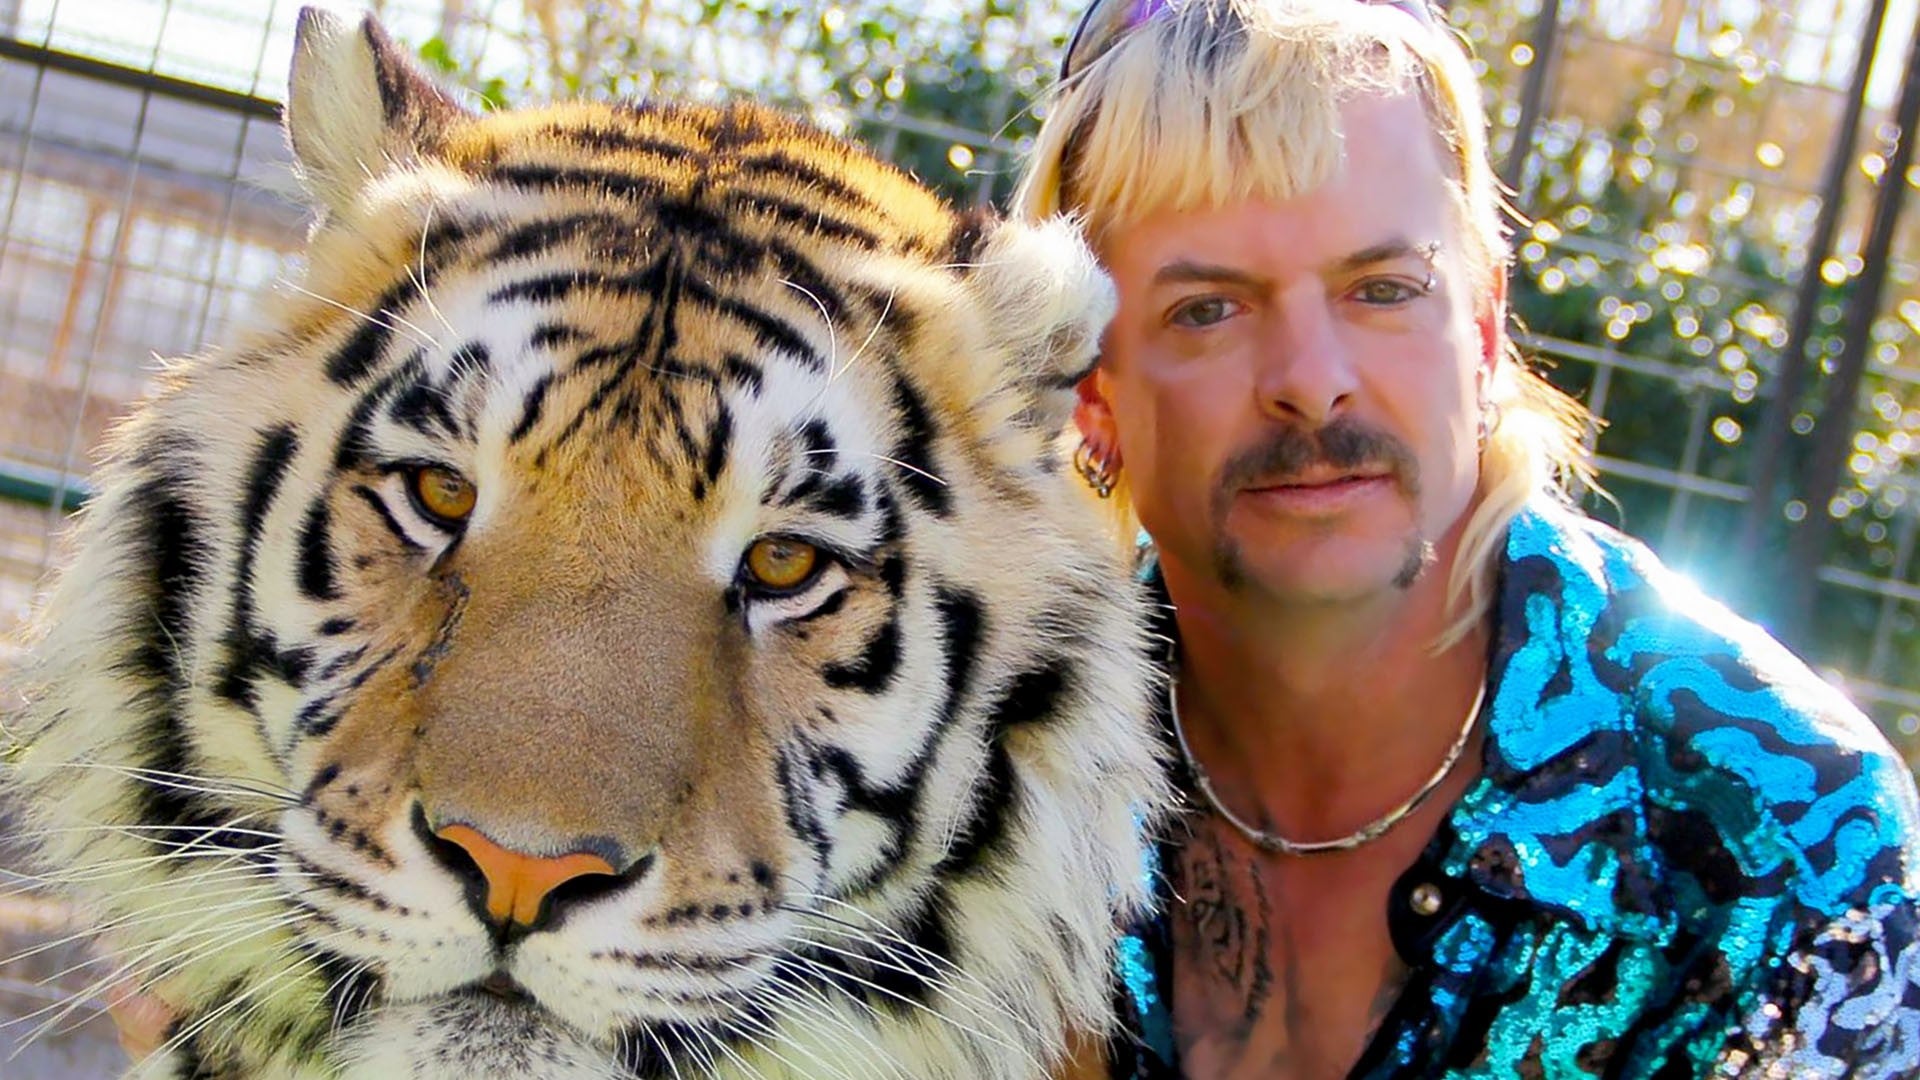 Joe Exotic, Who Exactly is Tiger King ?